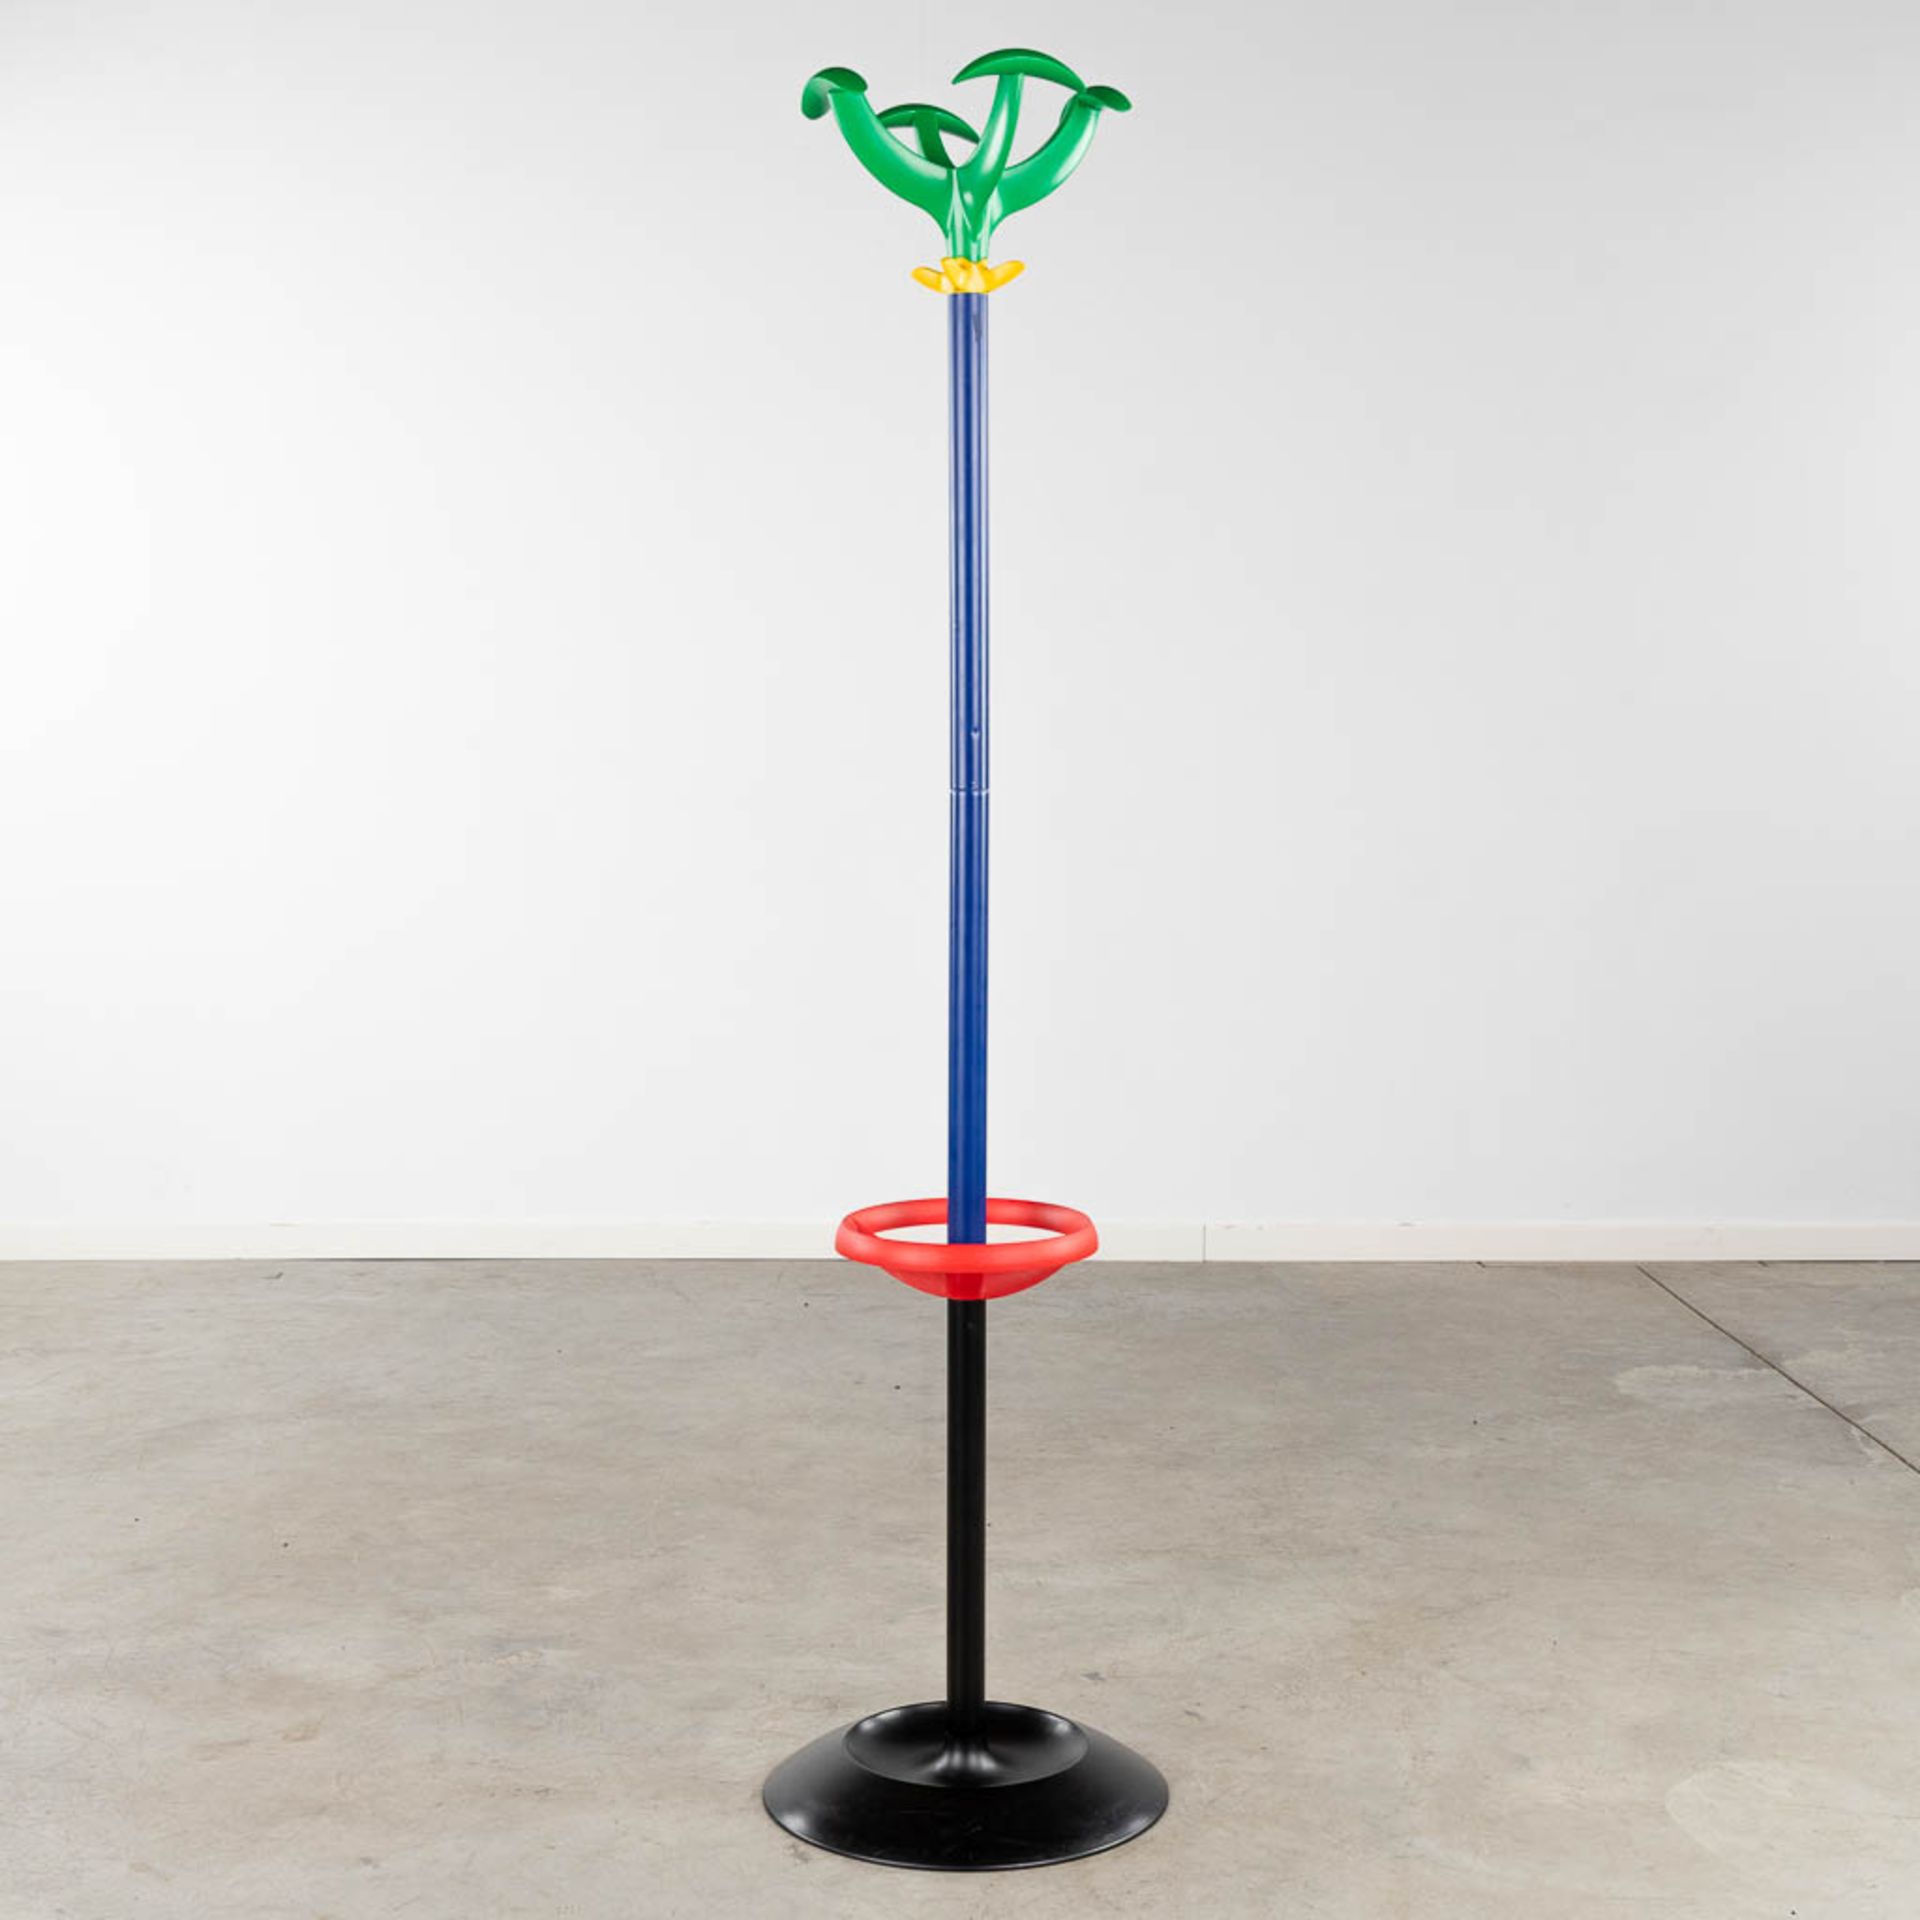 Raul BARBIERI (1946) 'Cactus' for Rexite, a coathanger. (H:165 x D:40 cm) - Image 5 of 13